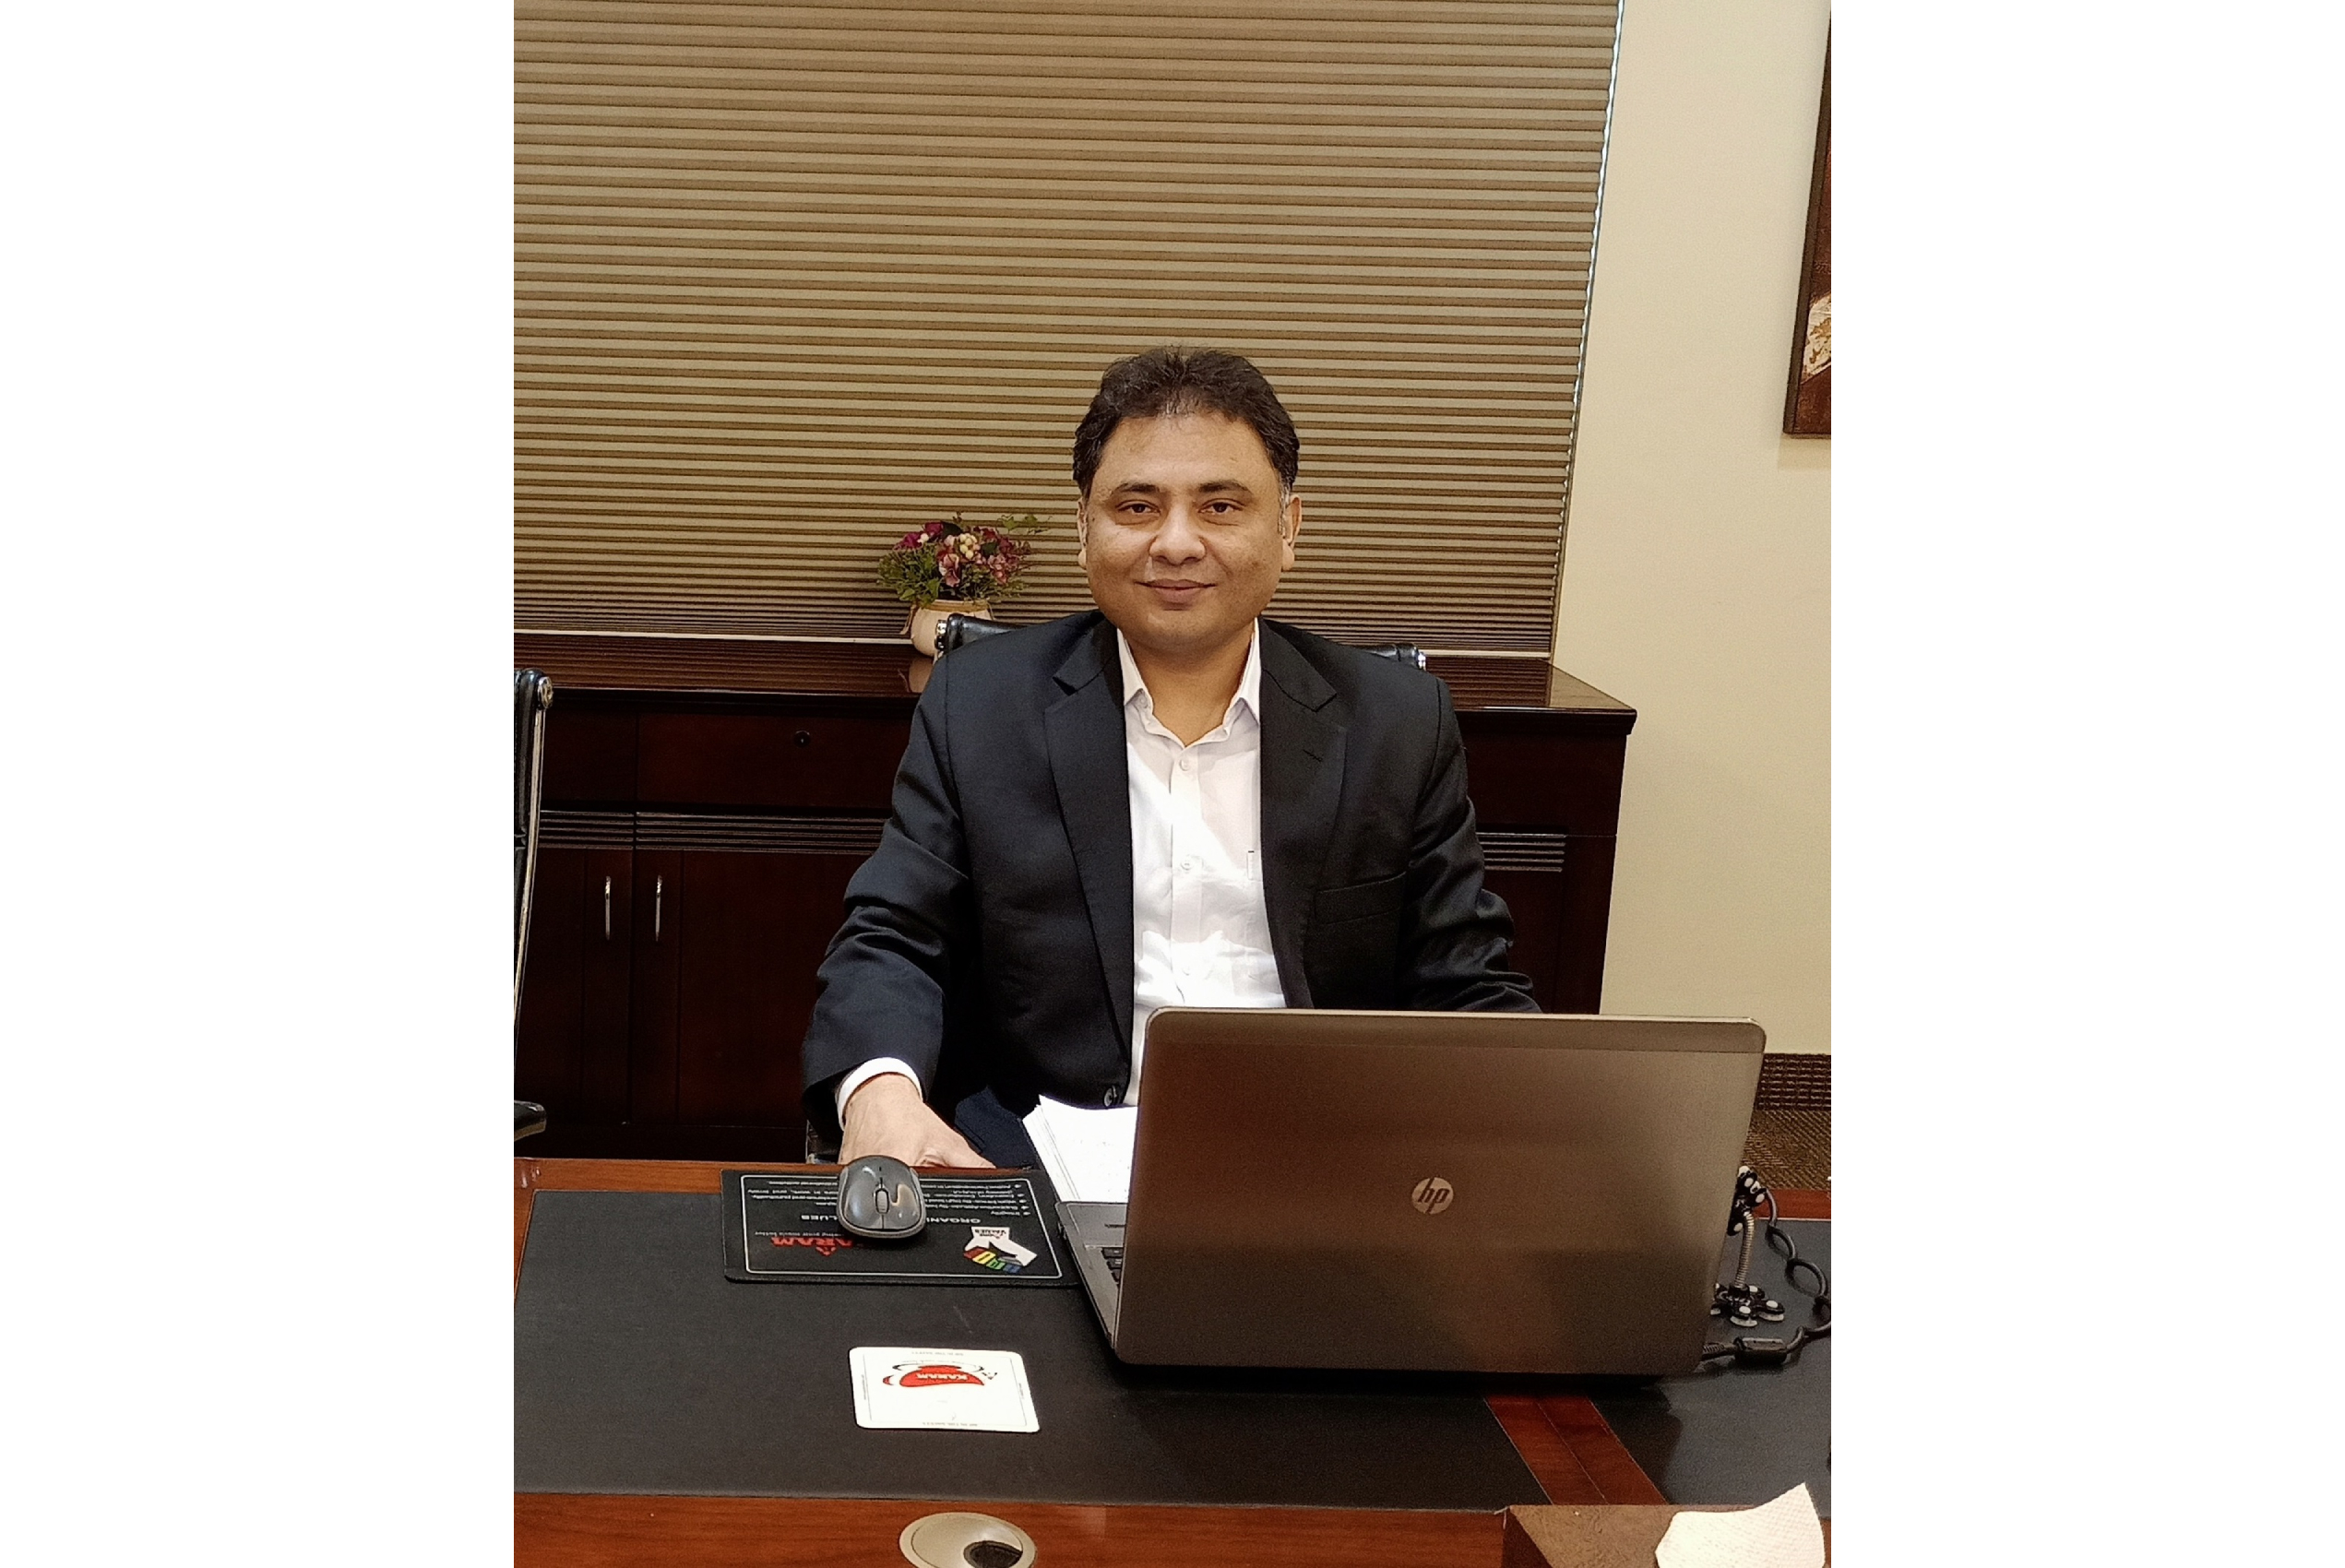 Our major focus is going to be to improvise on the current product offerings in line with the changing needs of the user, says Asif Iqbal, National Sales Head, KARAM Industries